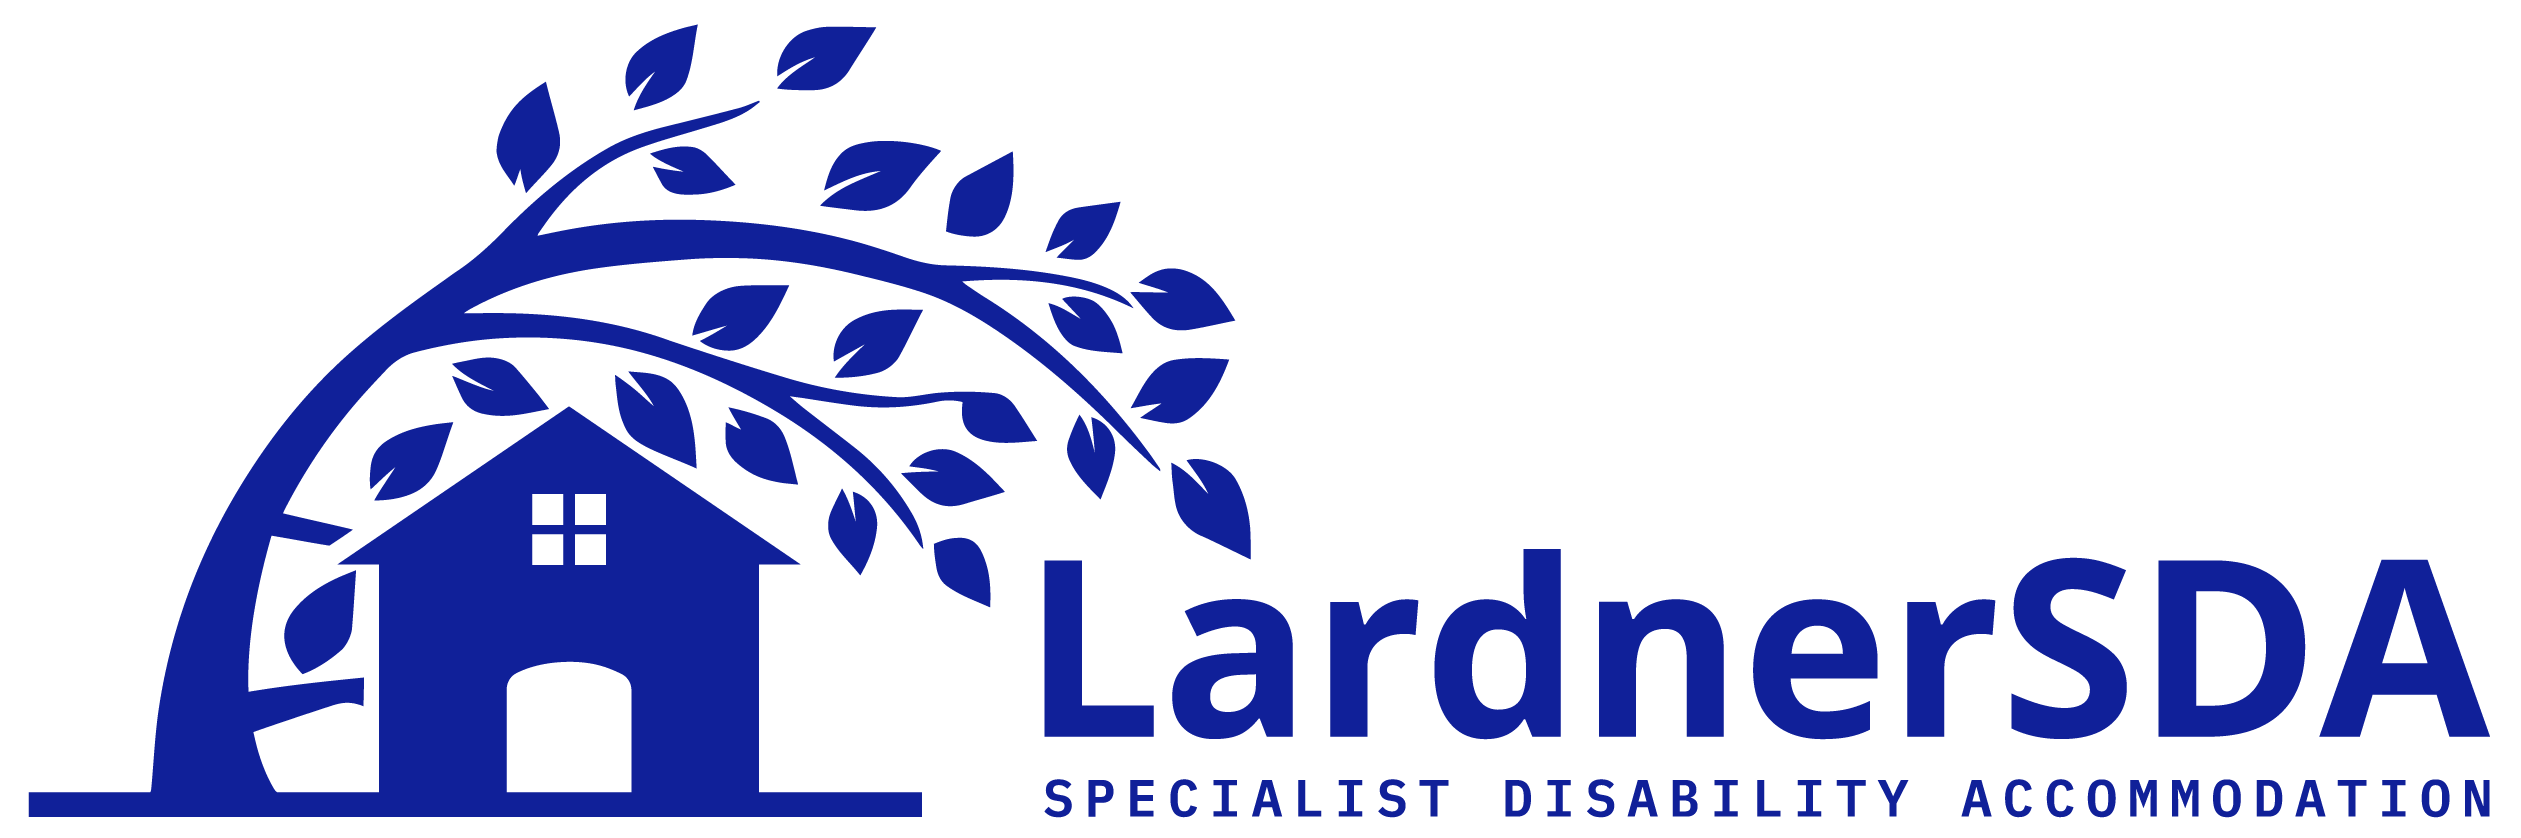 Lardner Specialist Disability Accommodation Consulting | Adelaide